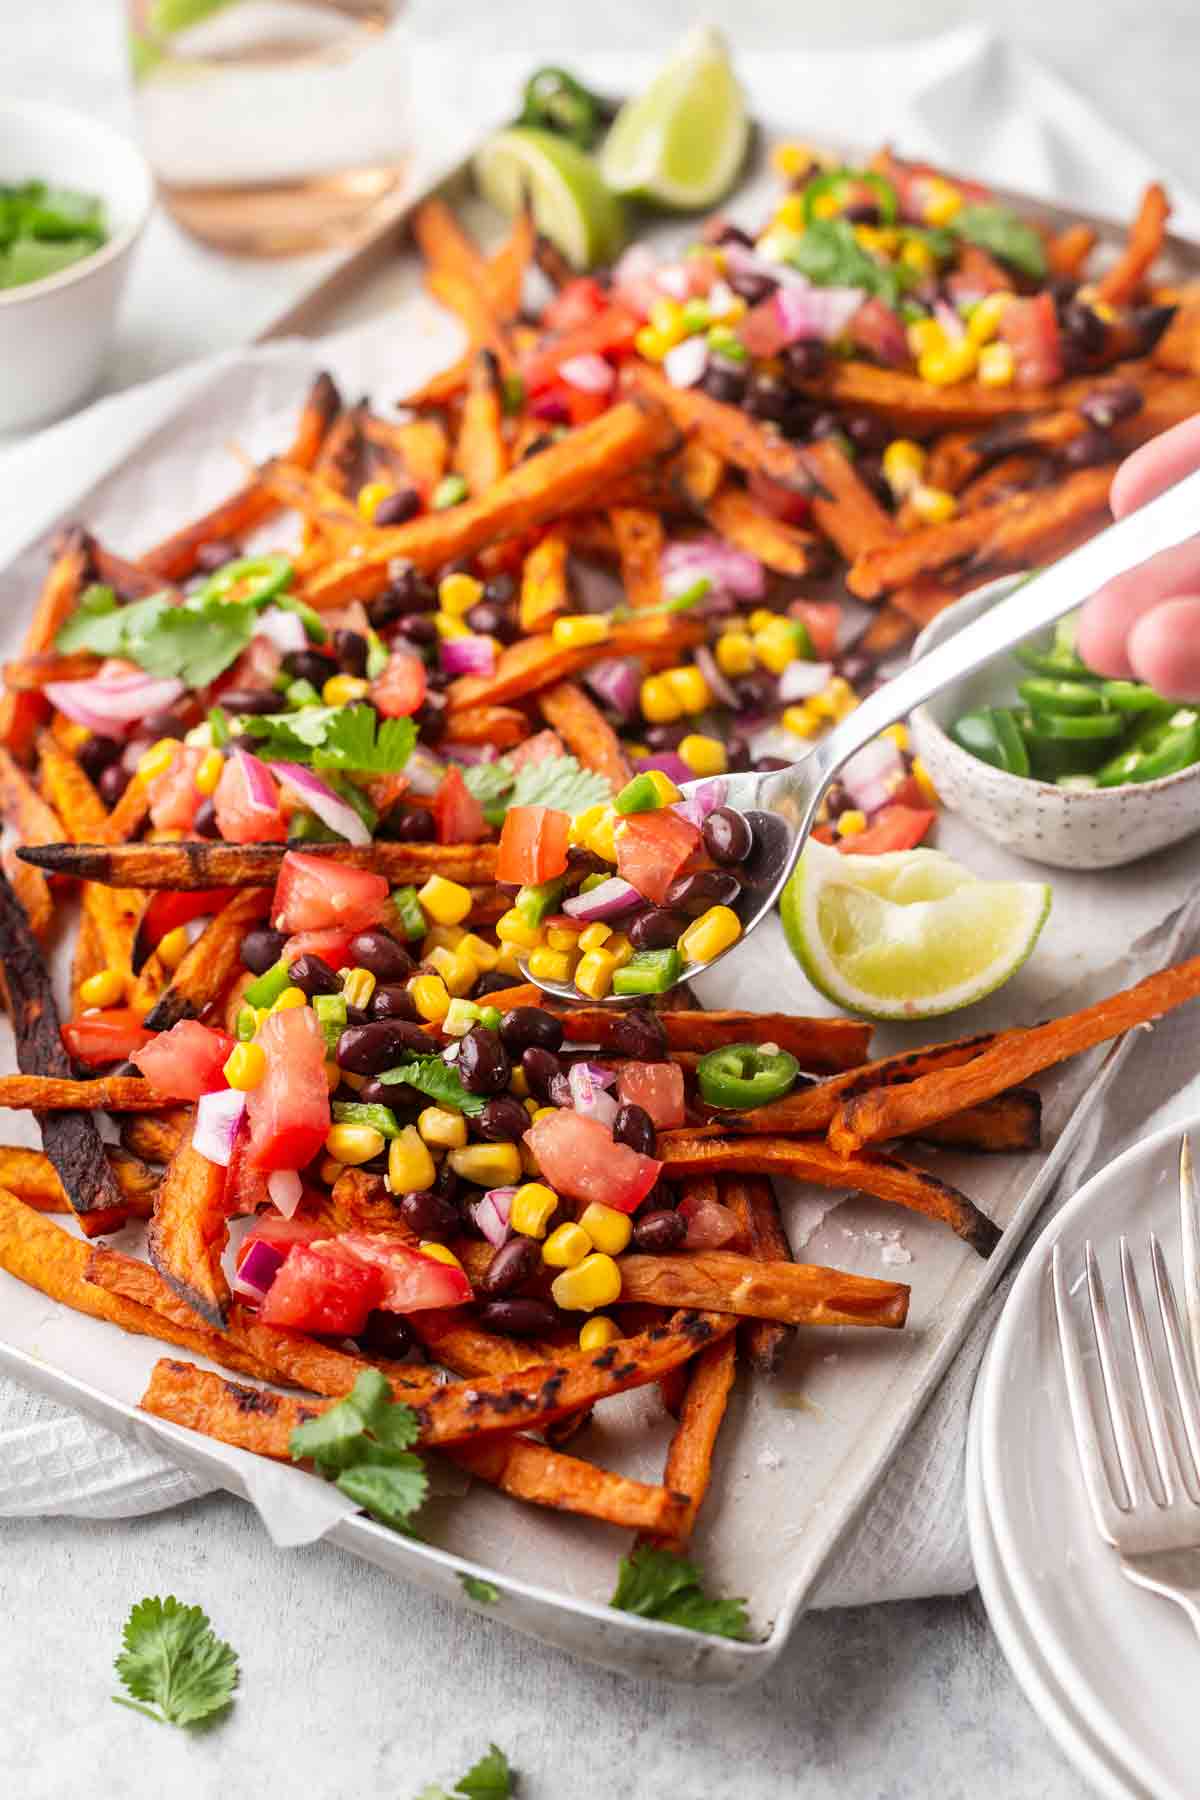 Healthy Loaded Mexican Sweet Potato Fries - Appetizer or Dinner